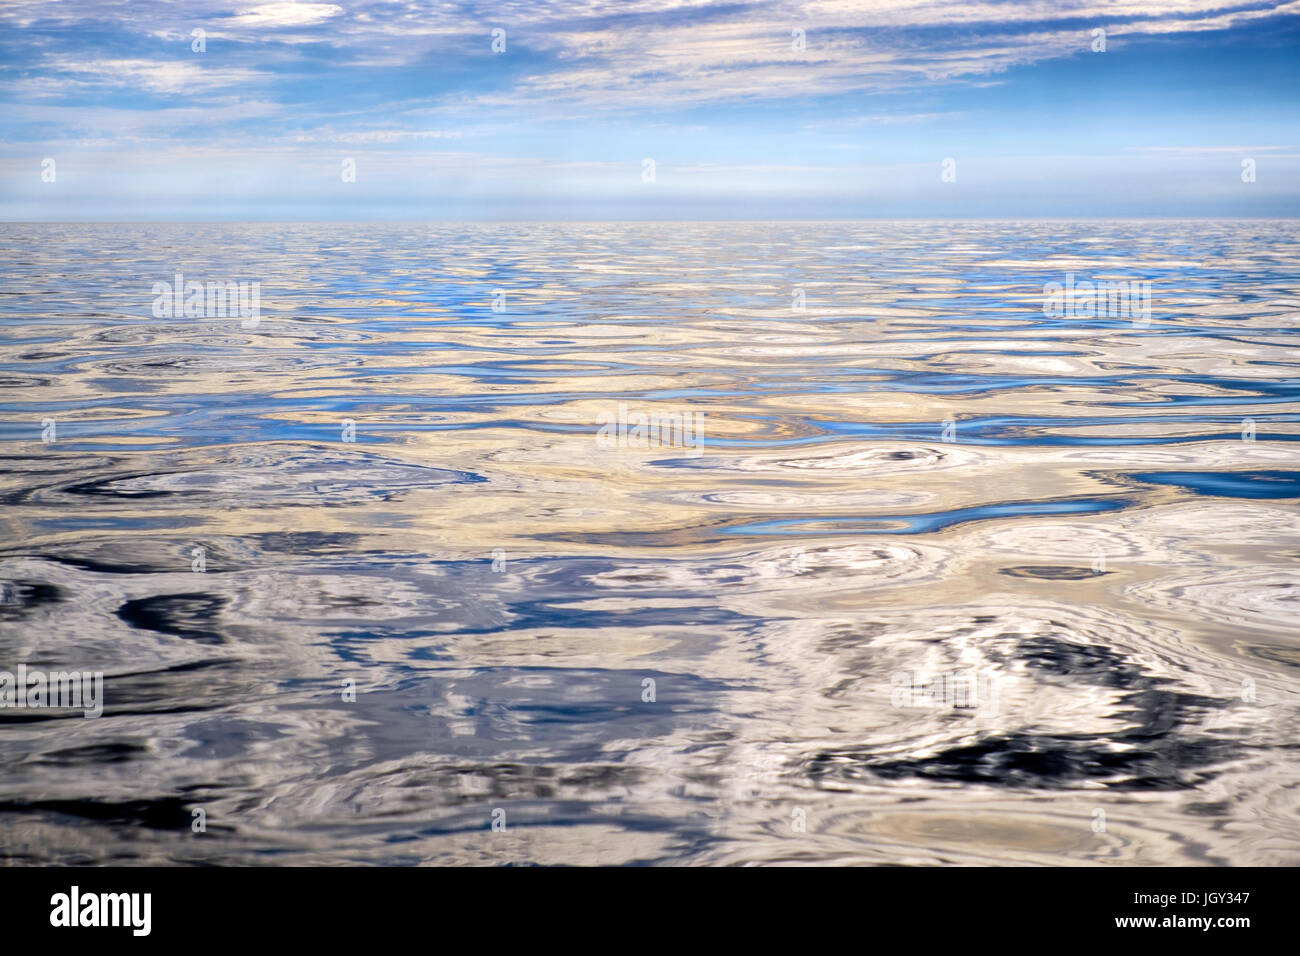 A smooth, glassy, empty sea off Anglesey, Wales, UK Stock Photo